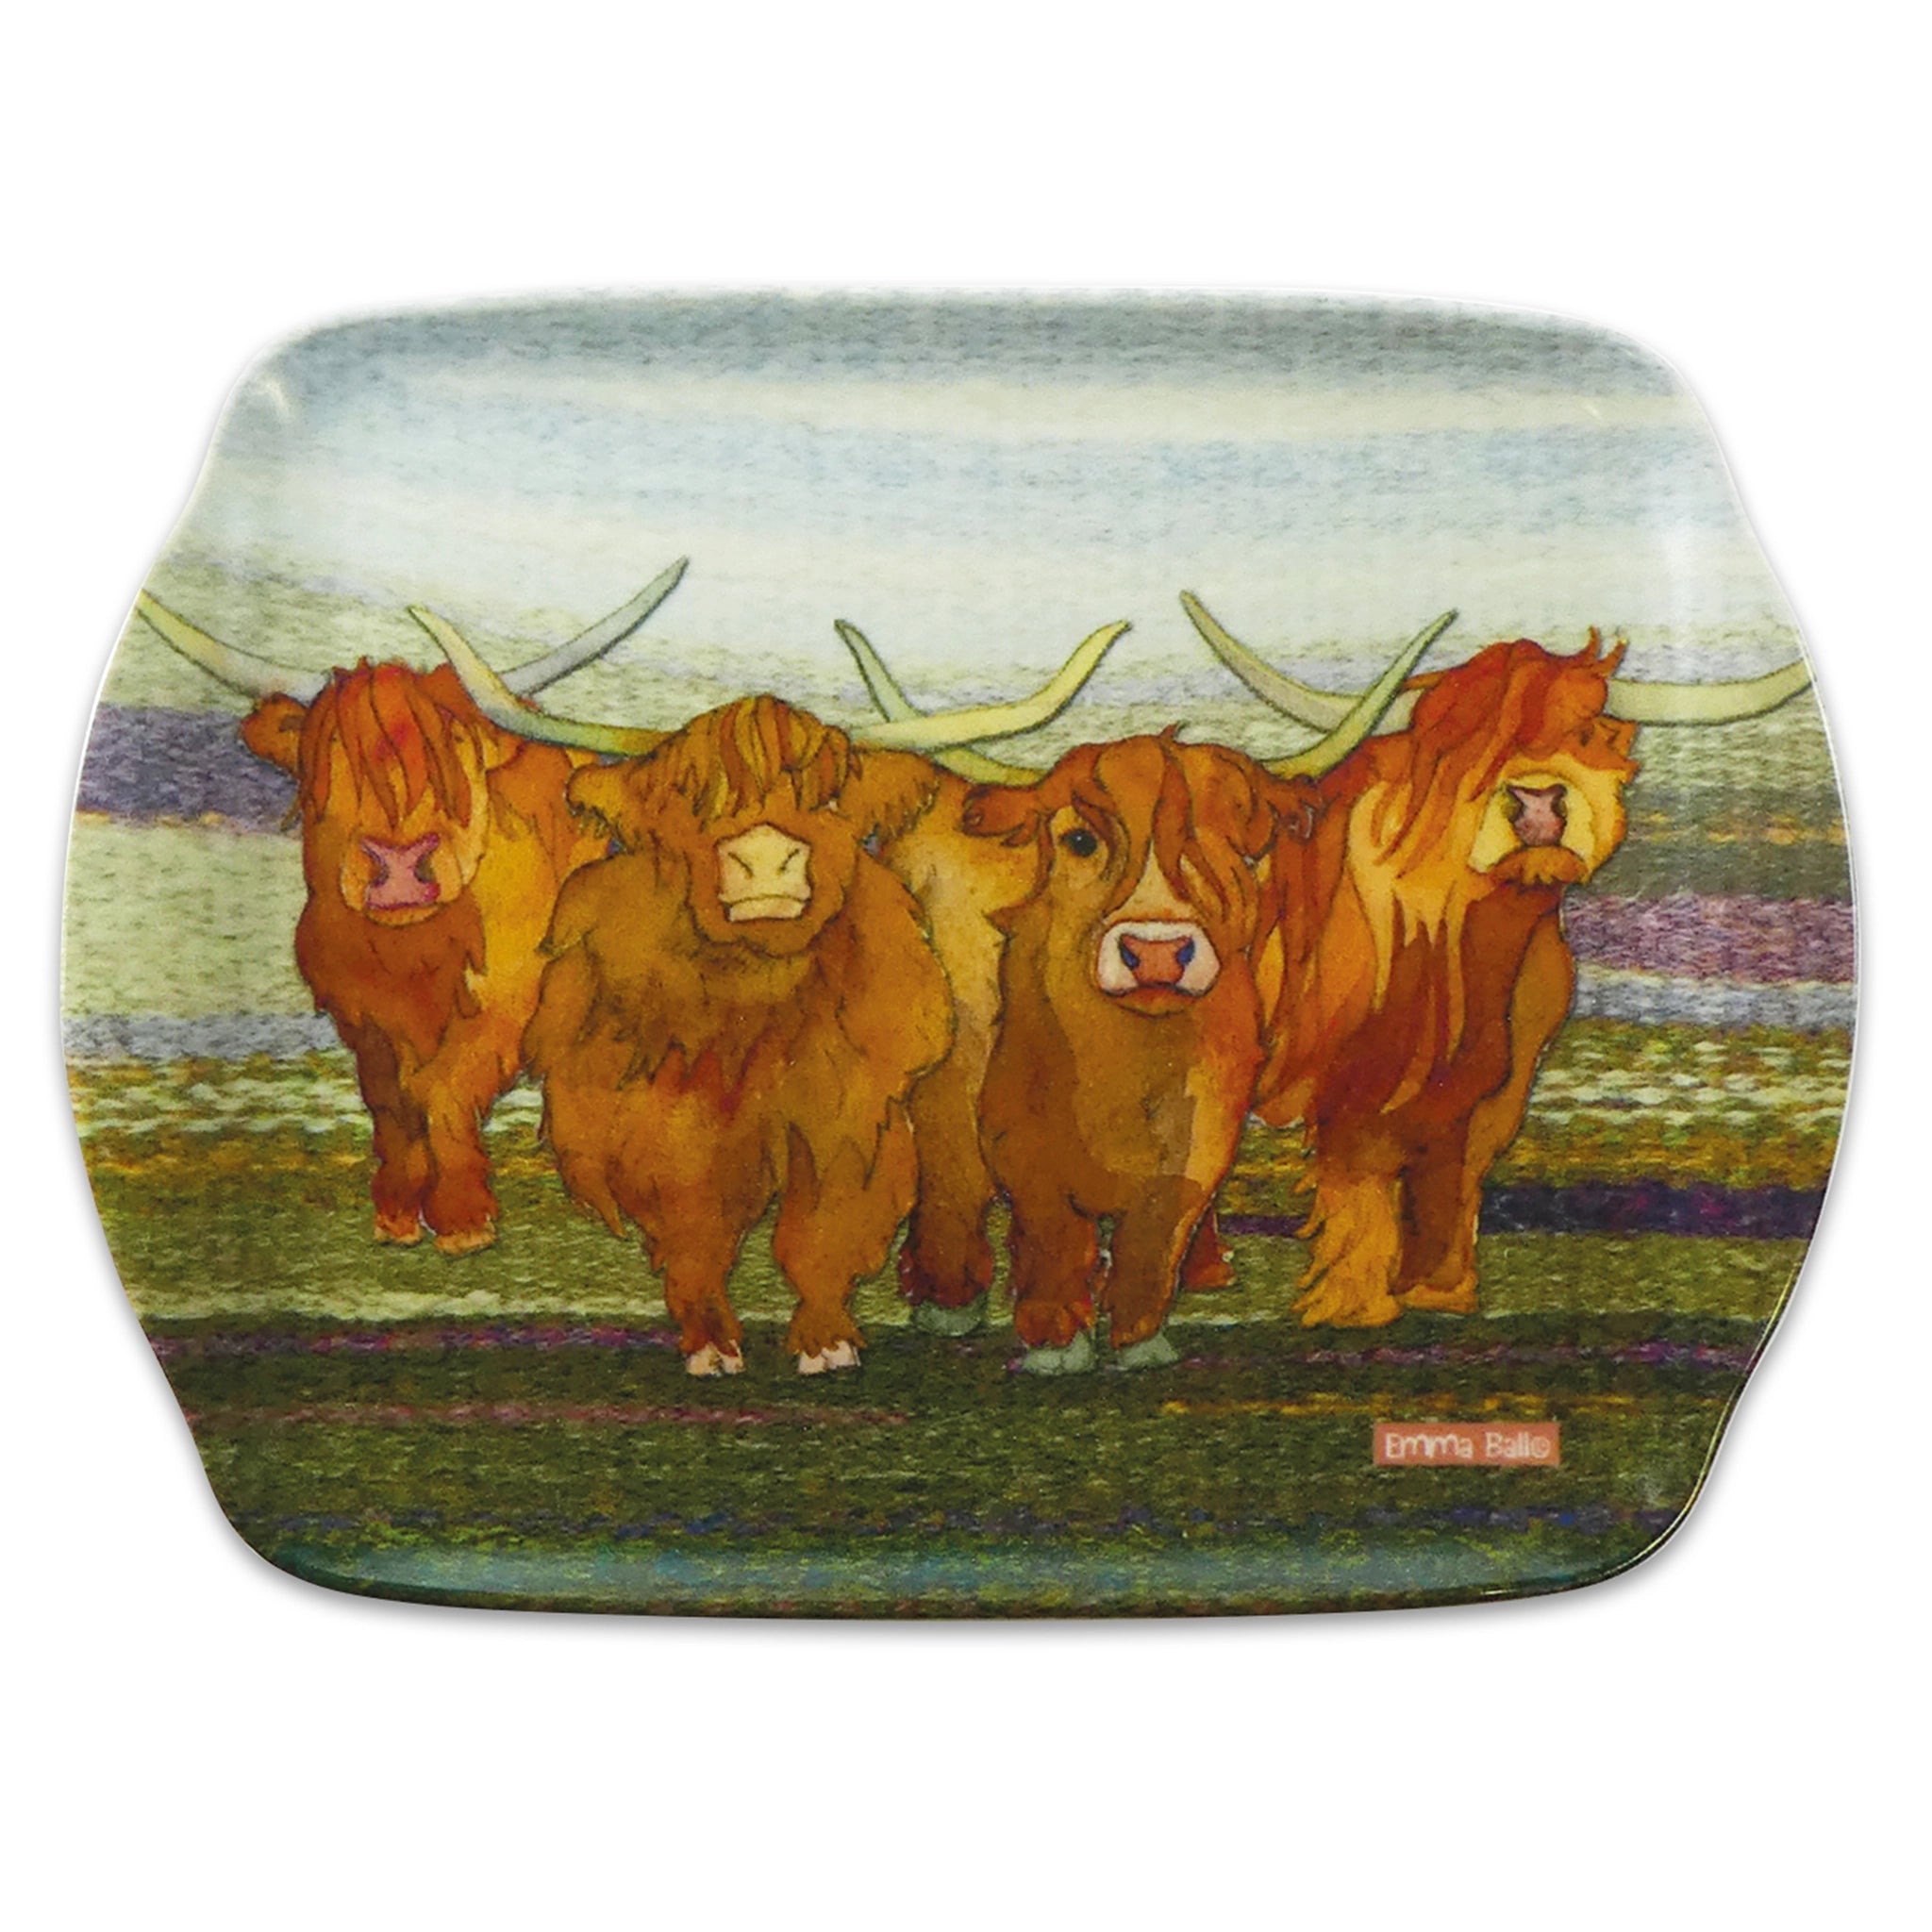 A small scatter dish tray with a design of Highland Cows on a felted landscape background